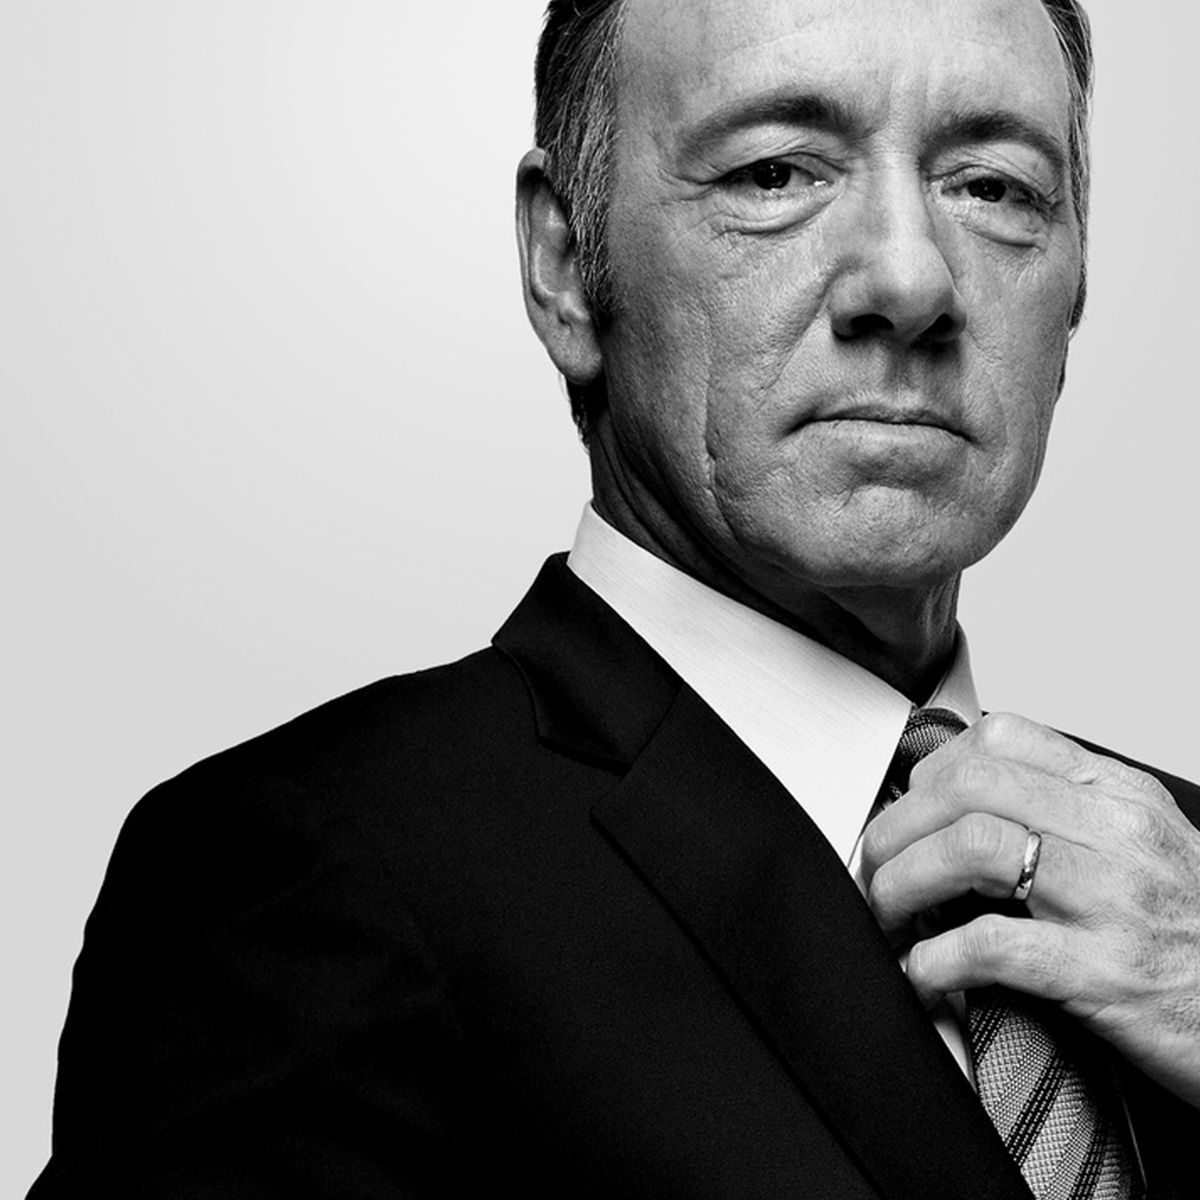 Kevin-Spacey-quote-rebel-promo-43